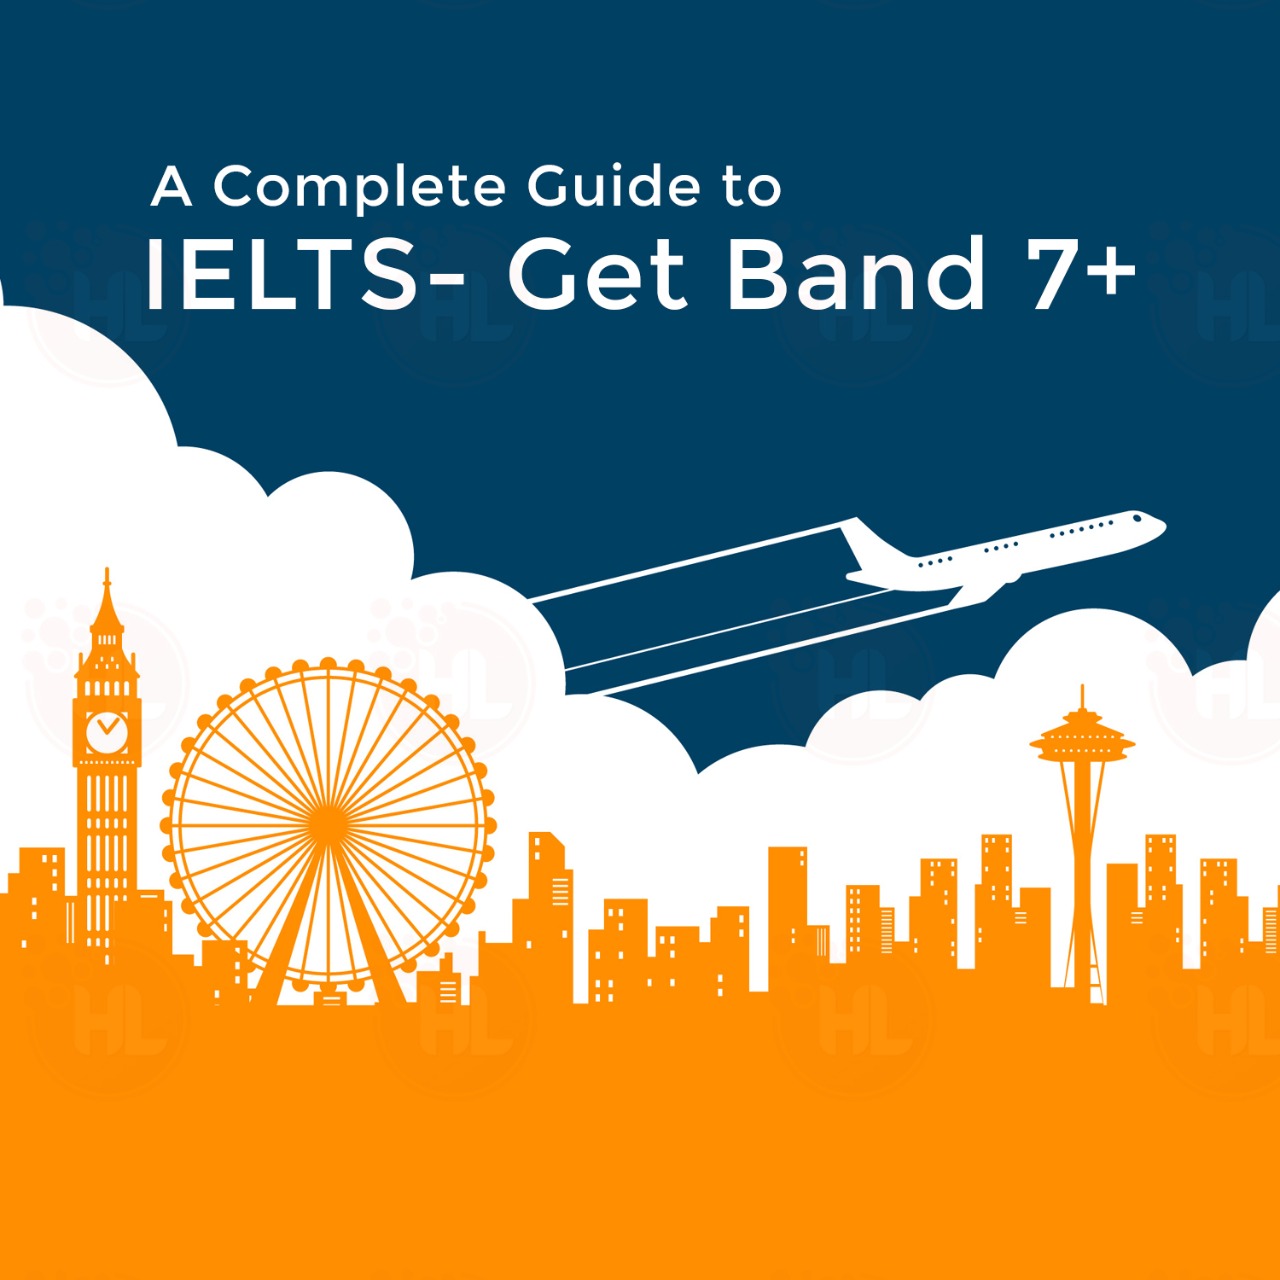 A Complete Guide to IELTS- Get Band 7+